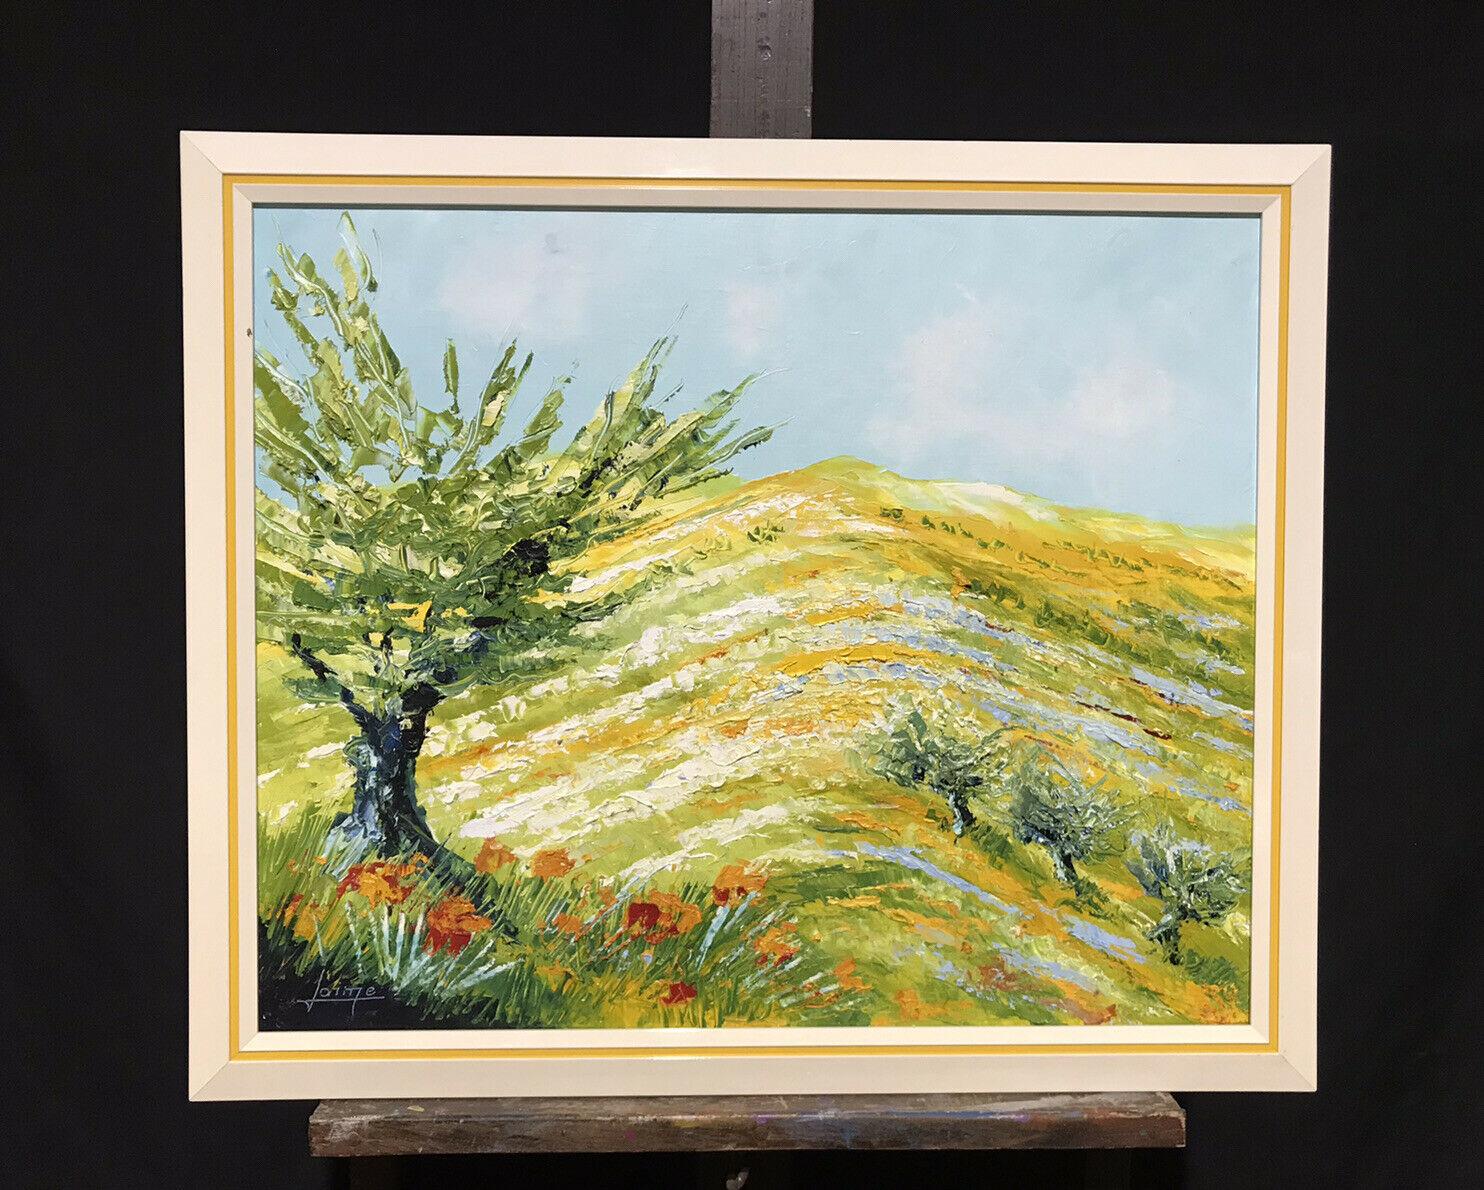 PROVENCAL LANDSCAPE LARGE VINTAGE FRENCH POST IMPRESSIONIST SIGNED OIL PAINTING - Painting by Gerard Laime